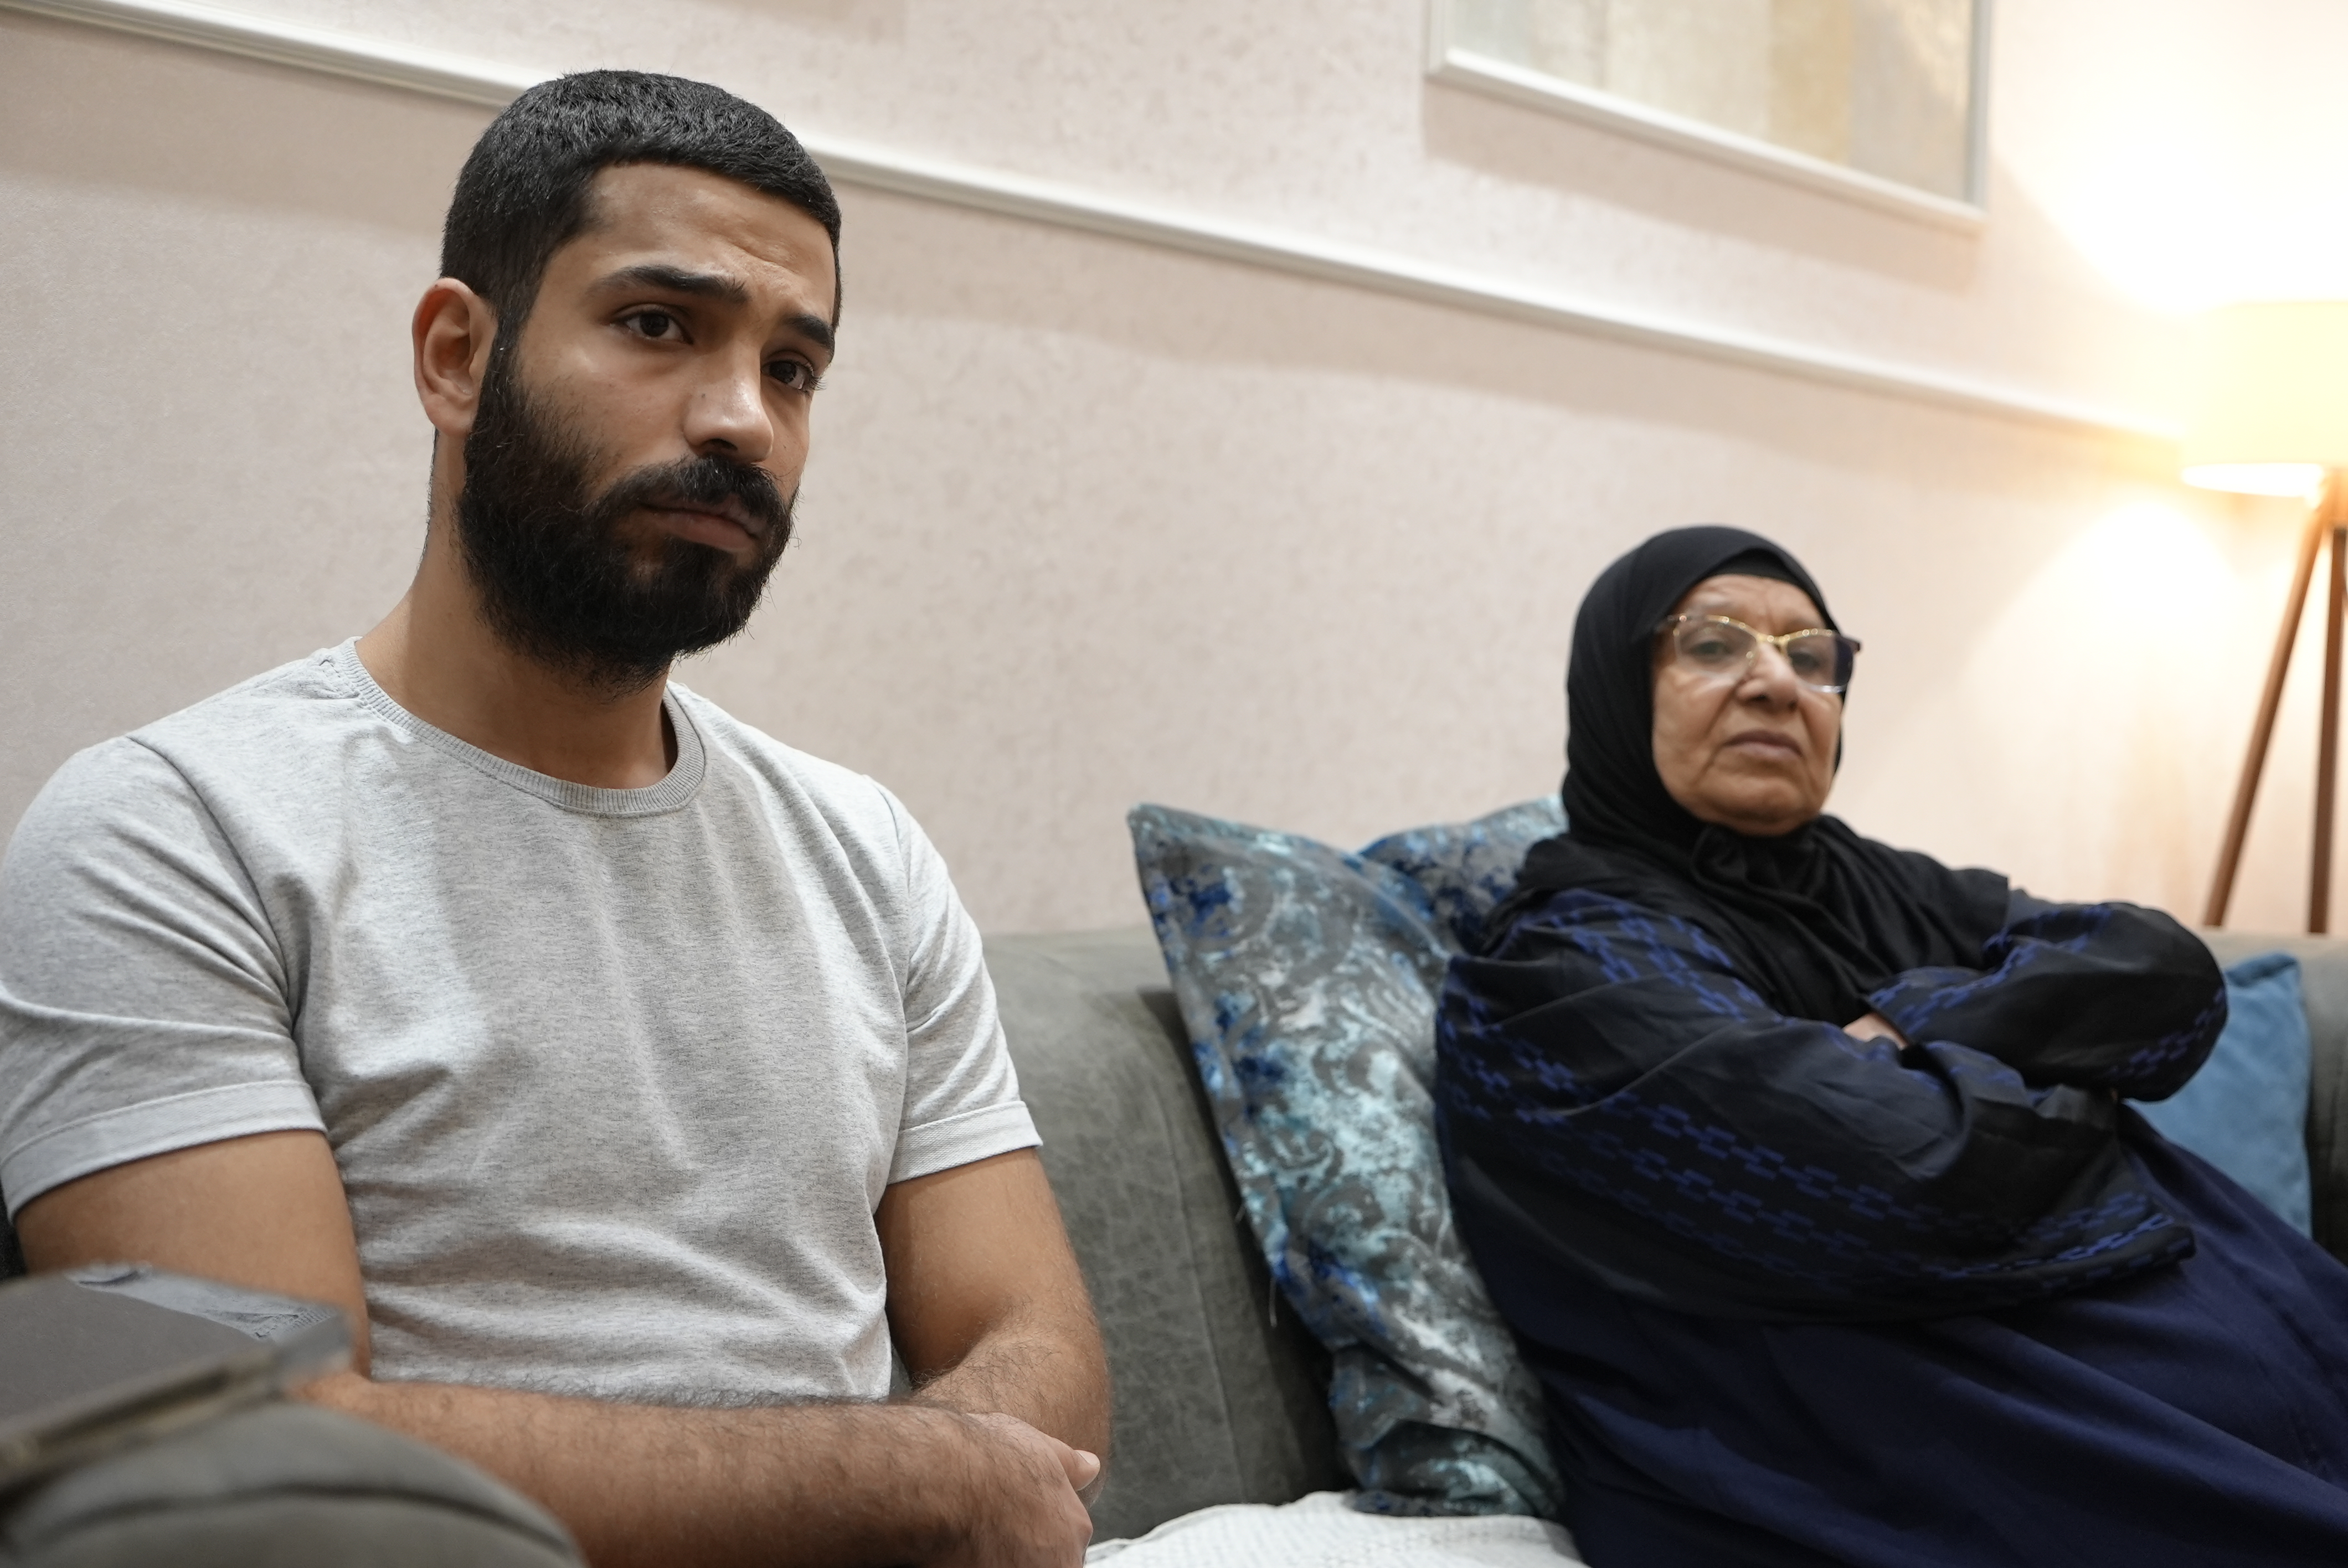 Baha Mousa's mother Hadiqa Marzooq (r) sits alongside her grandson and Mousa's son of 